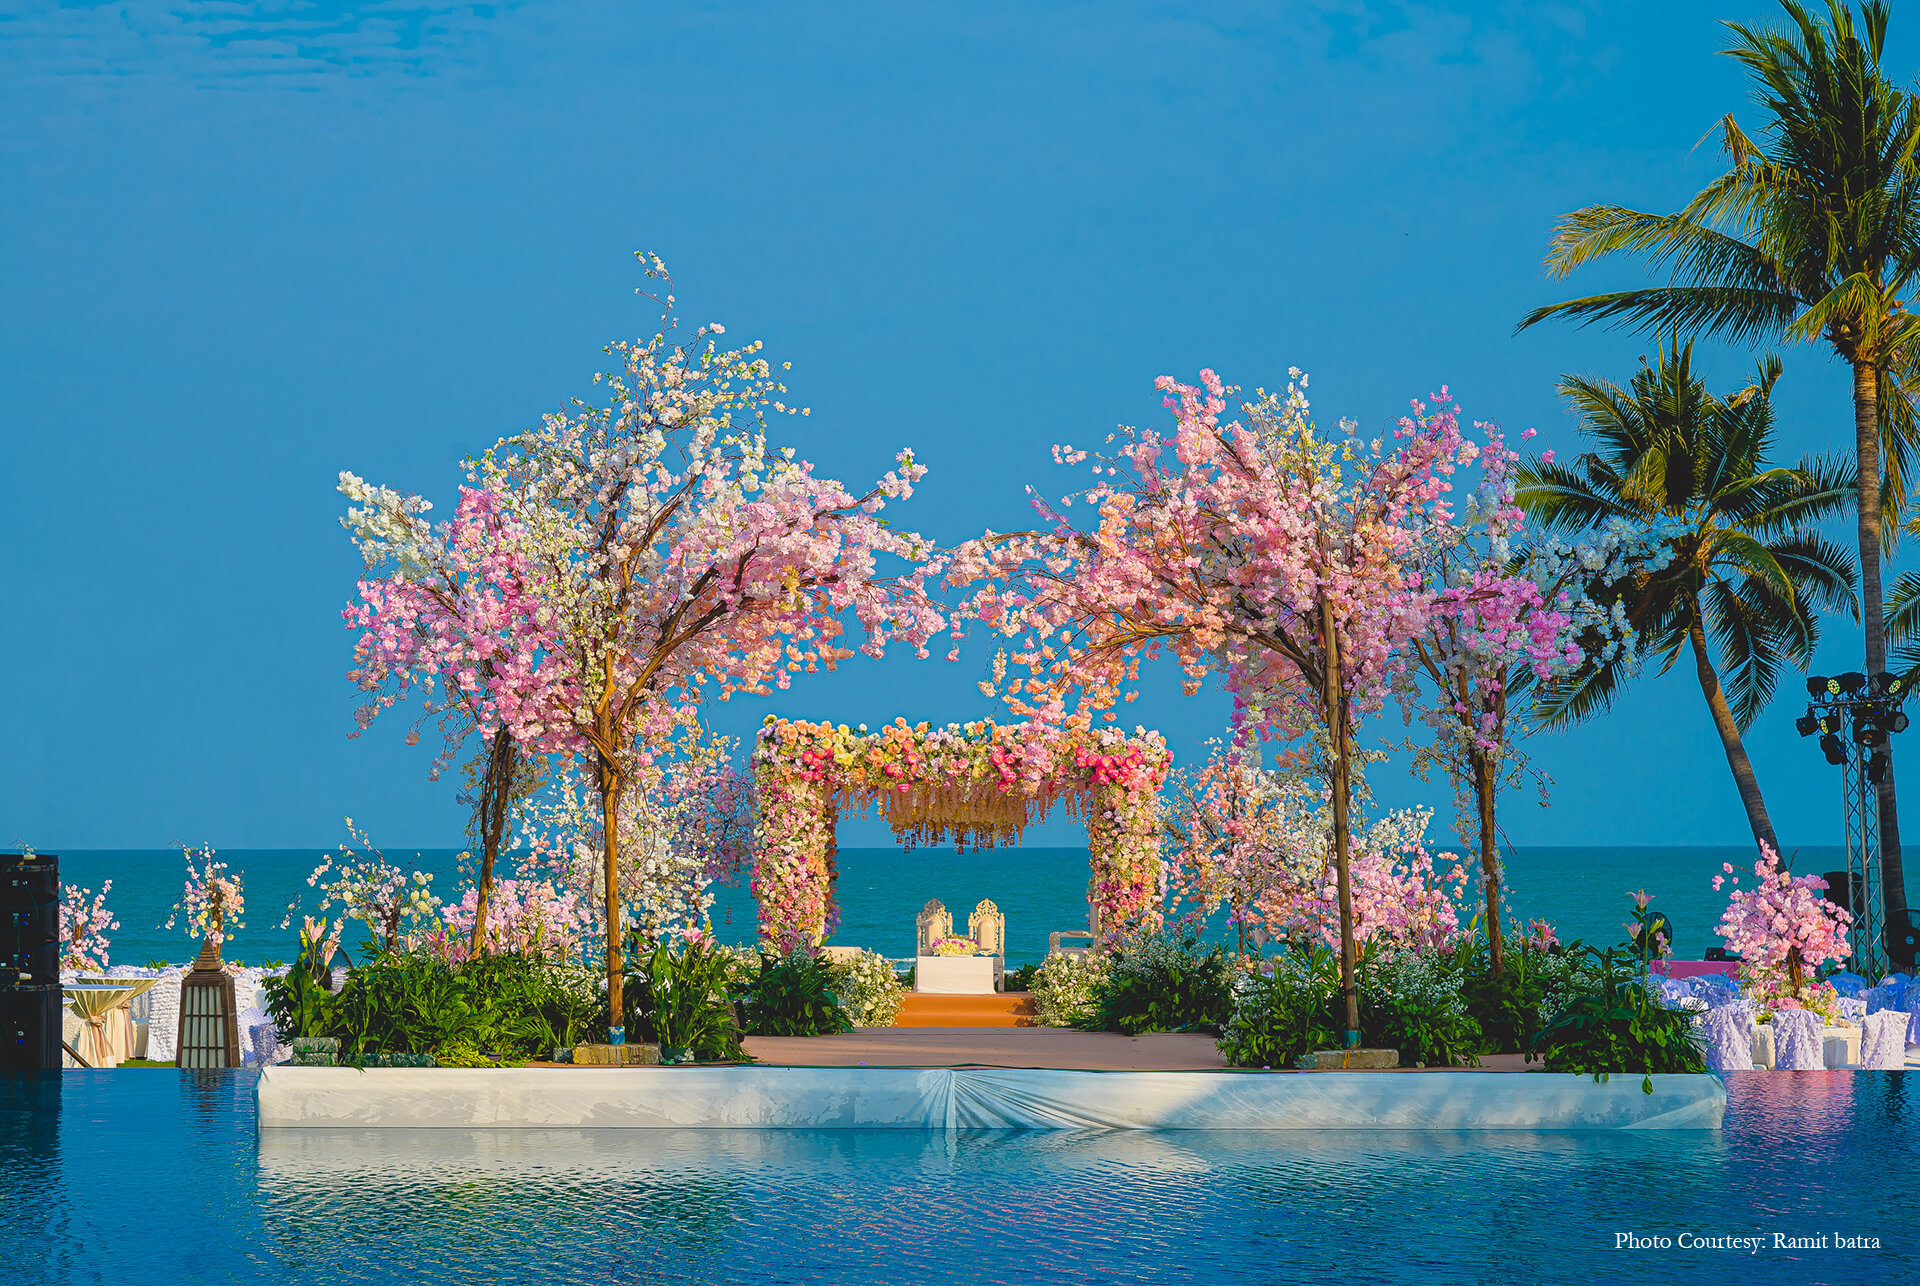 Thailand is set to become the Number one destination for Indian Weddings in 2023